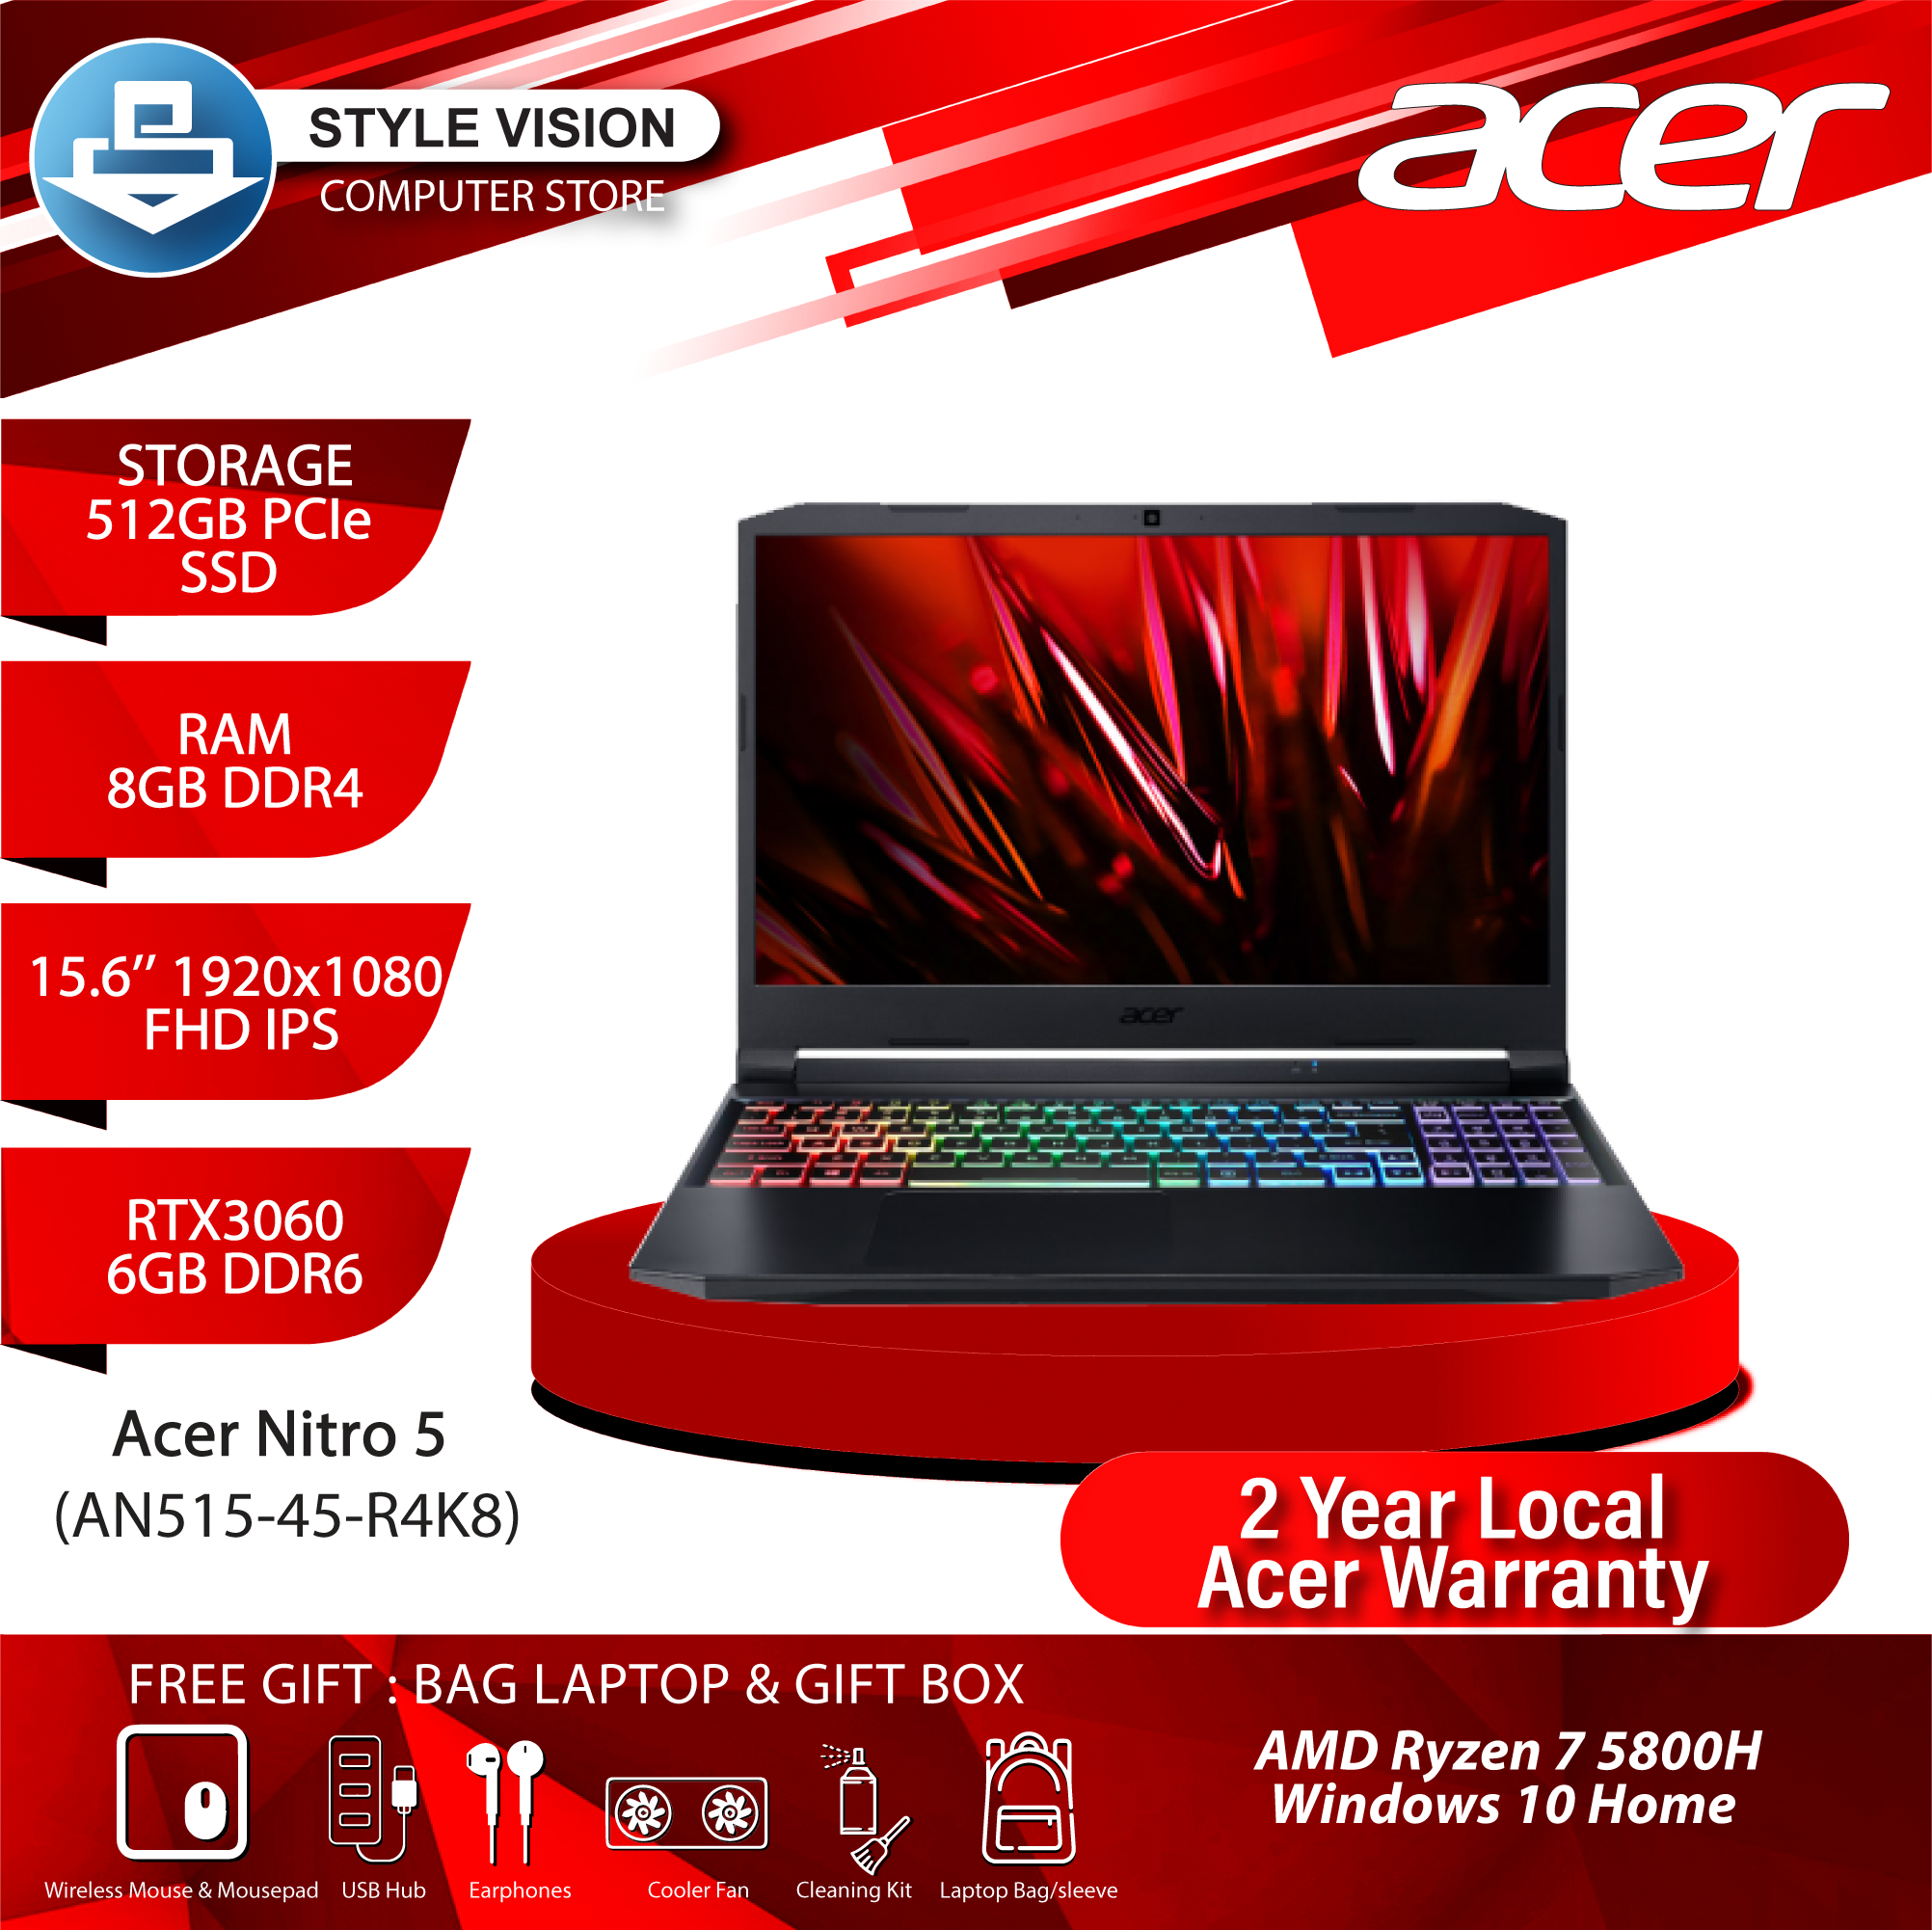 Acer Nitro 5 Gaming AN515-45-R4K8 AMD Ryzen 7  5800H/8GB/512GB/RTX3060/15.6"144Hz/Win10 – Style Vision Computer Store